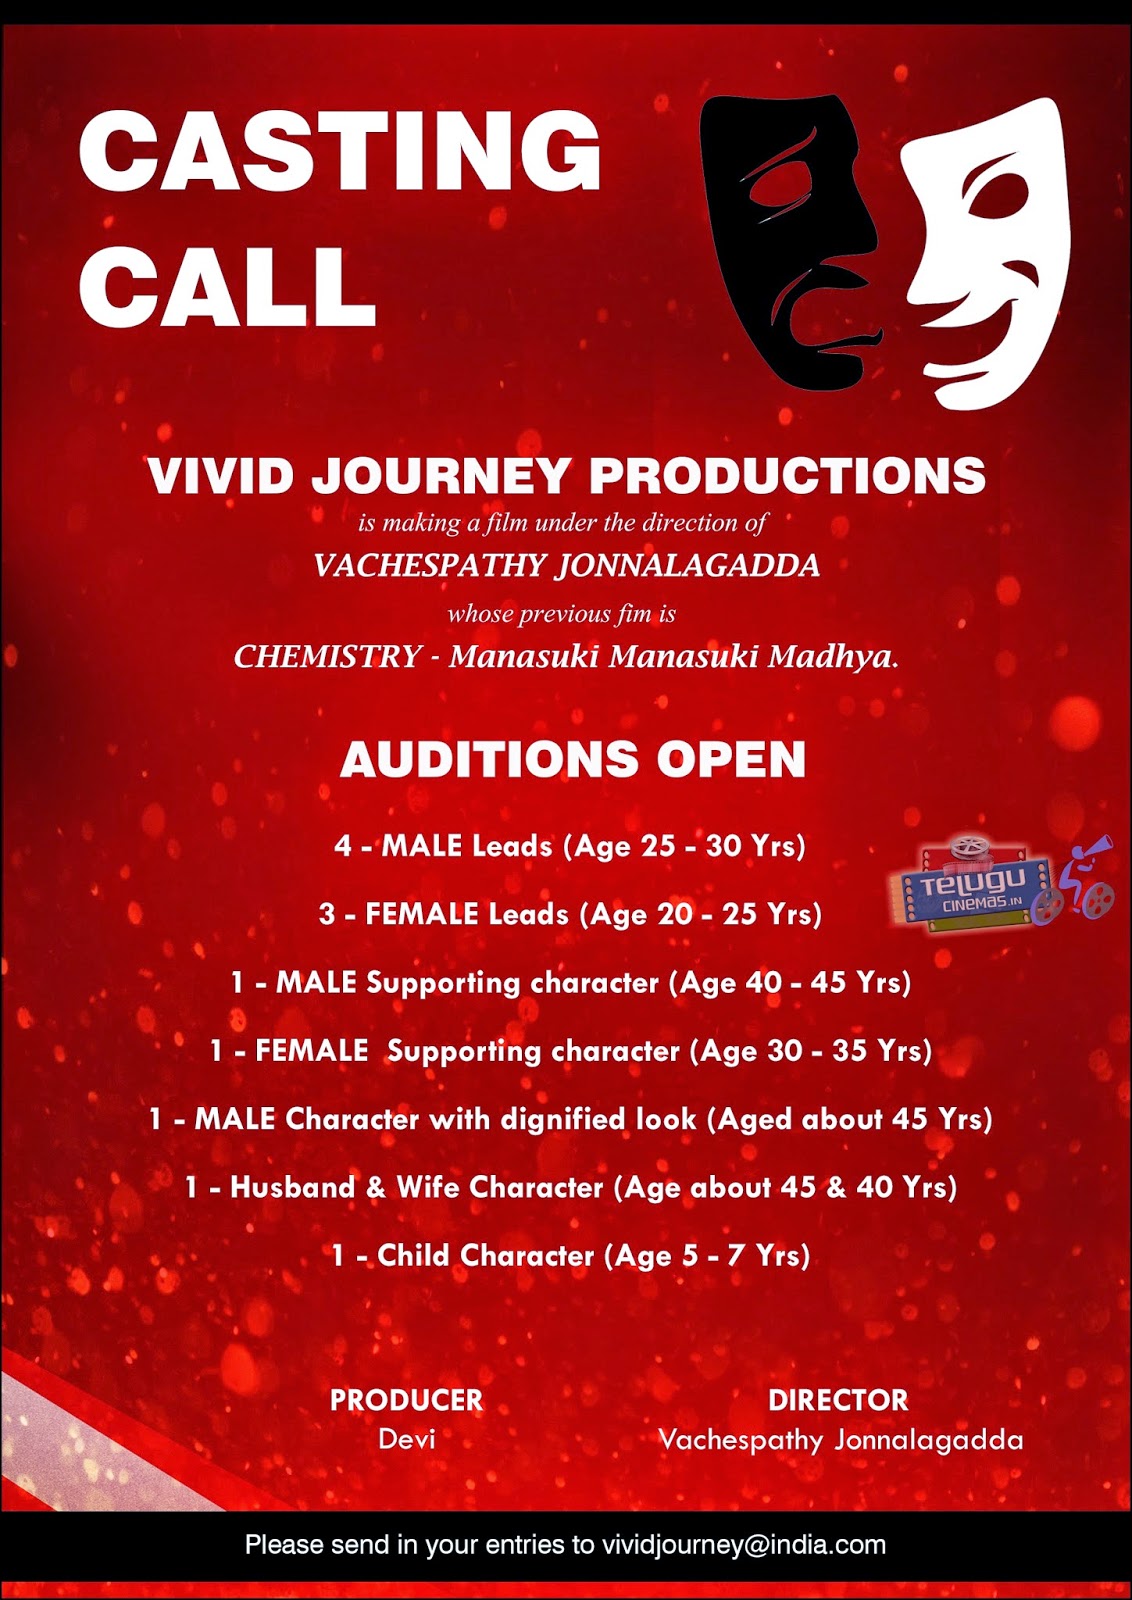  CASTING CALL  VIVID JOURNEY PRODUCTIONS  is making a film under the direction of VA CHESPA THY JONNALA GADDA whose previous fim is CHEMISTRY Manasuki Manasuki Madhya.  AUDITIONS OPEN  4 - MALE Leads (Age 25 - 30 Yrs) 3 - FEMALE Leads (Age 20 - 25 Yrs) 1 - MALE Supporting character (Age 40 - 45 Yrs) 1 - FEMALE Supporting character (Age 30 - 35 Yrs) 1 - MALE Character with dignified look (Aged about 45 Yrs) 1 - Husband & Wife Character (Age about 45 & 40 Yrs) 1 - Child Character (Age 5 - 7 Yrs)  PRODUCER Devi  DIRECTOR Vachespathy Jonnalagadda  Please send in your entries to vividjourney@india.com 